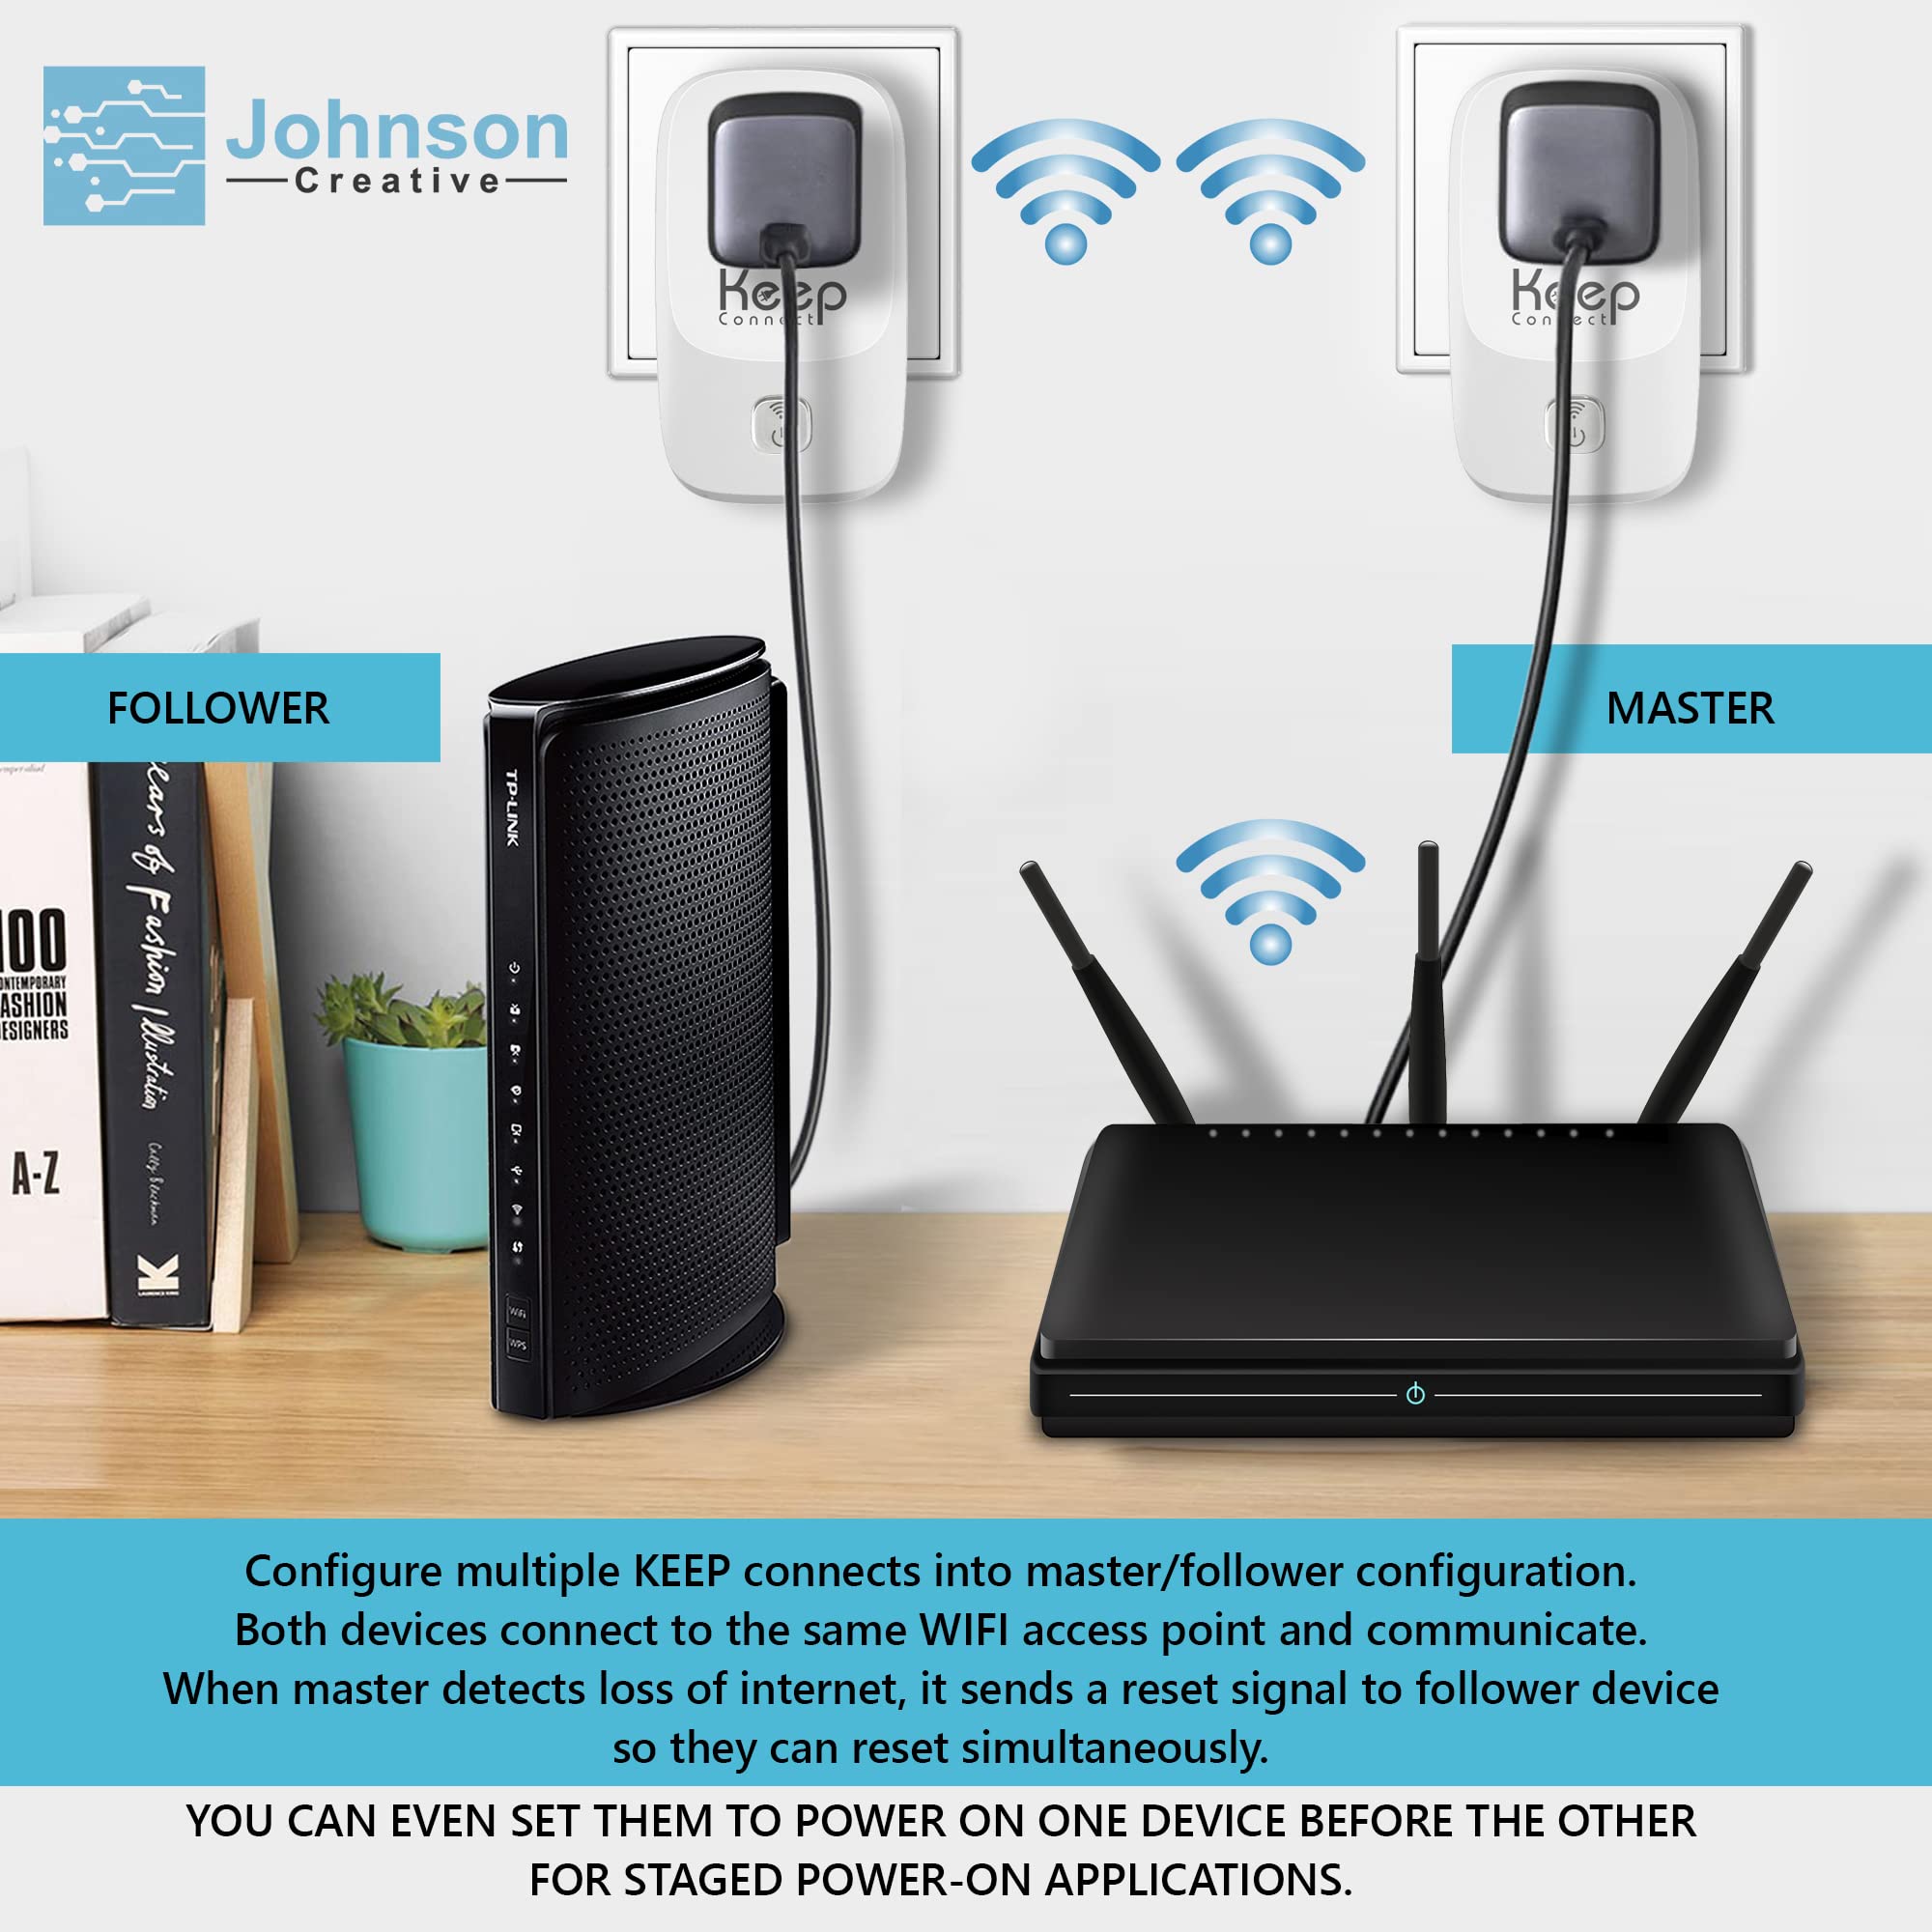 If you are using Wi-Fi, try connecting directly to your router using an Ethernet cable.
Restart your modem and router to refresh the connection.